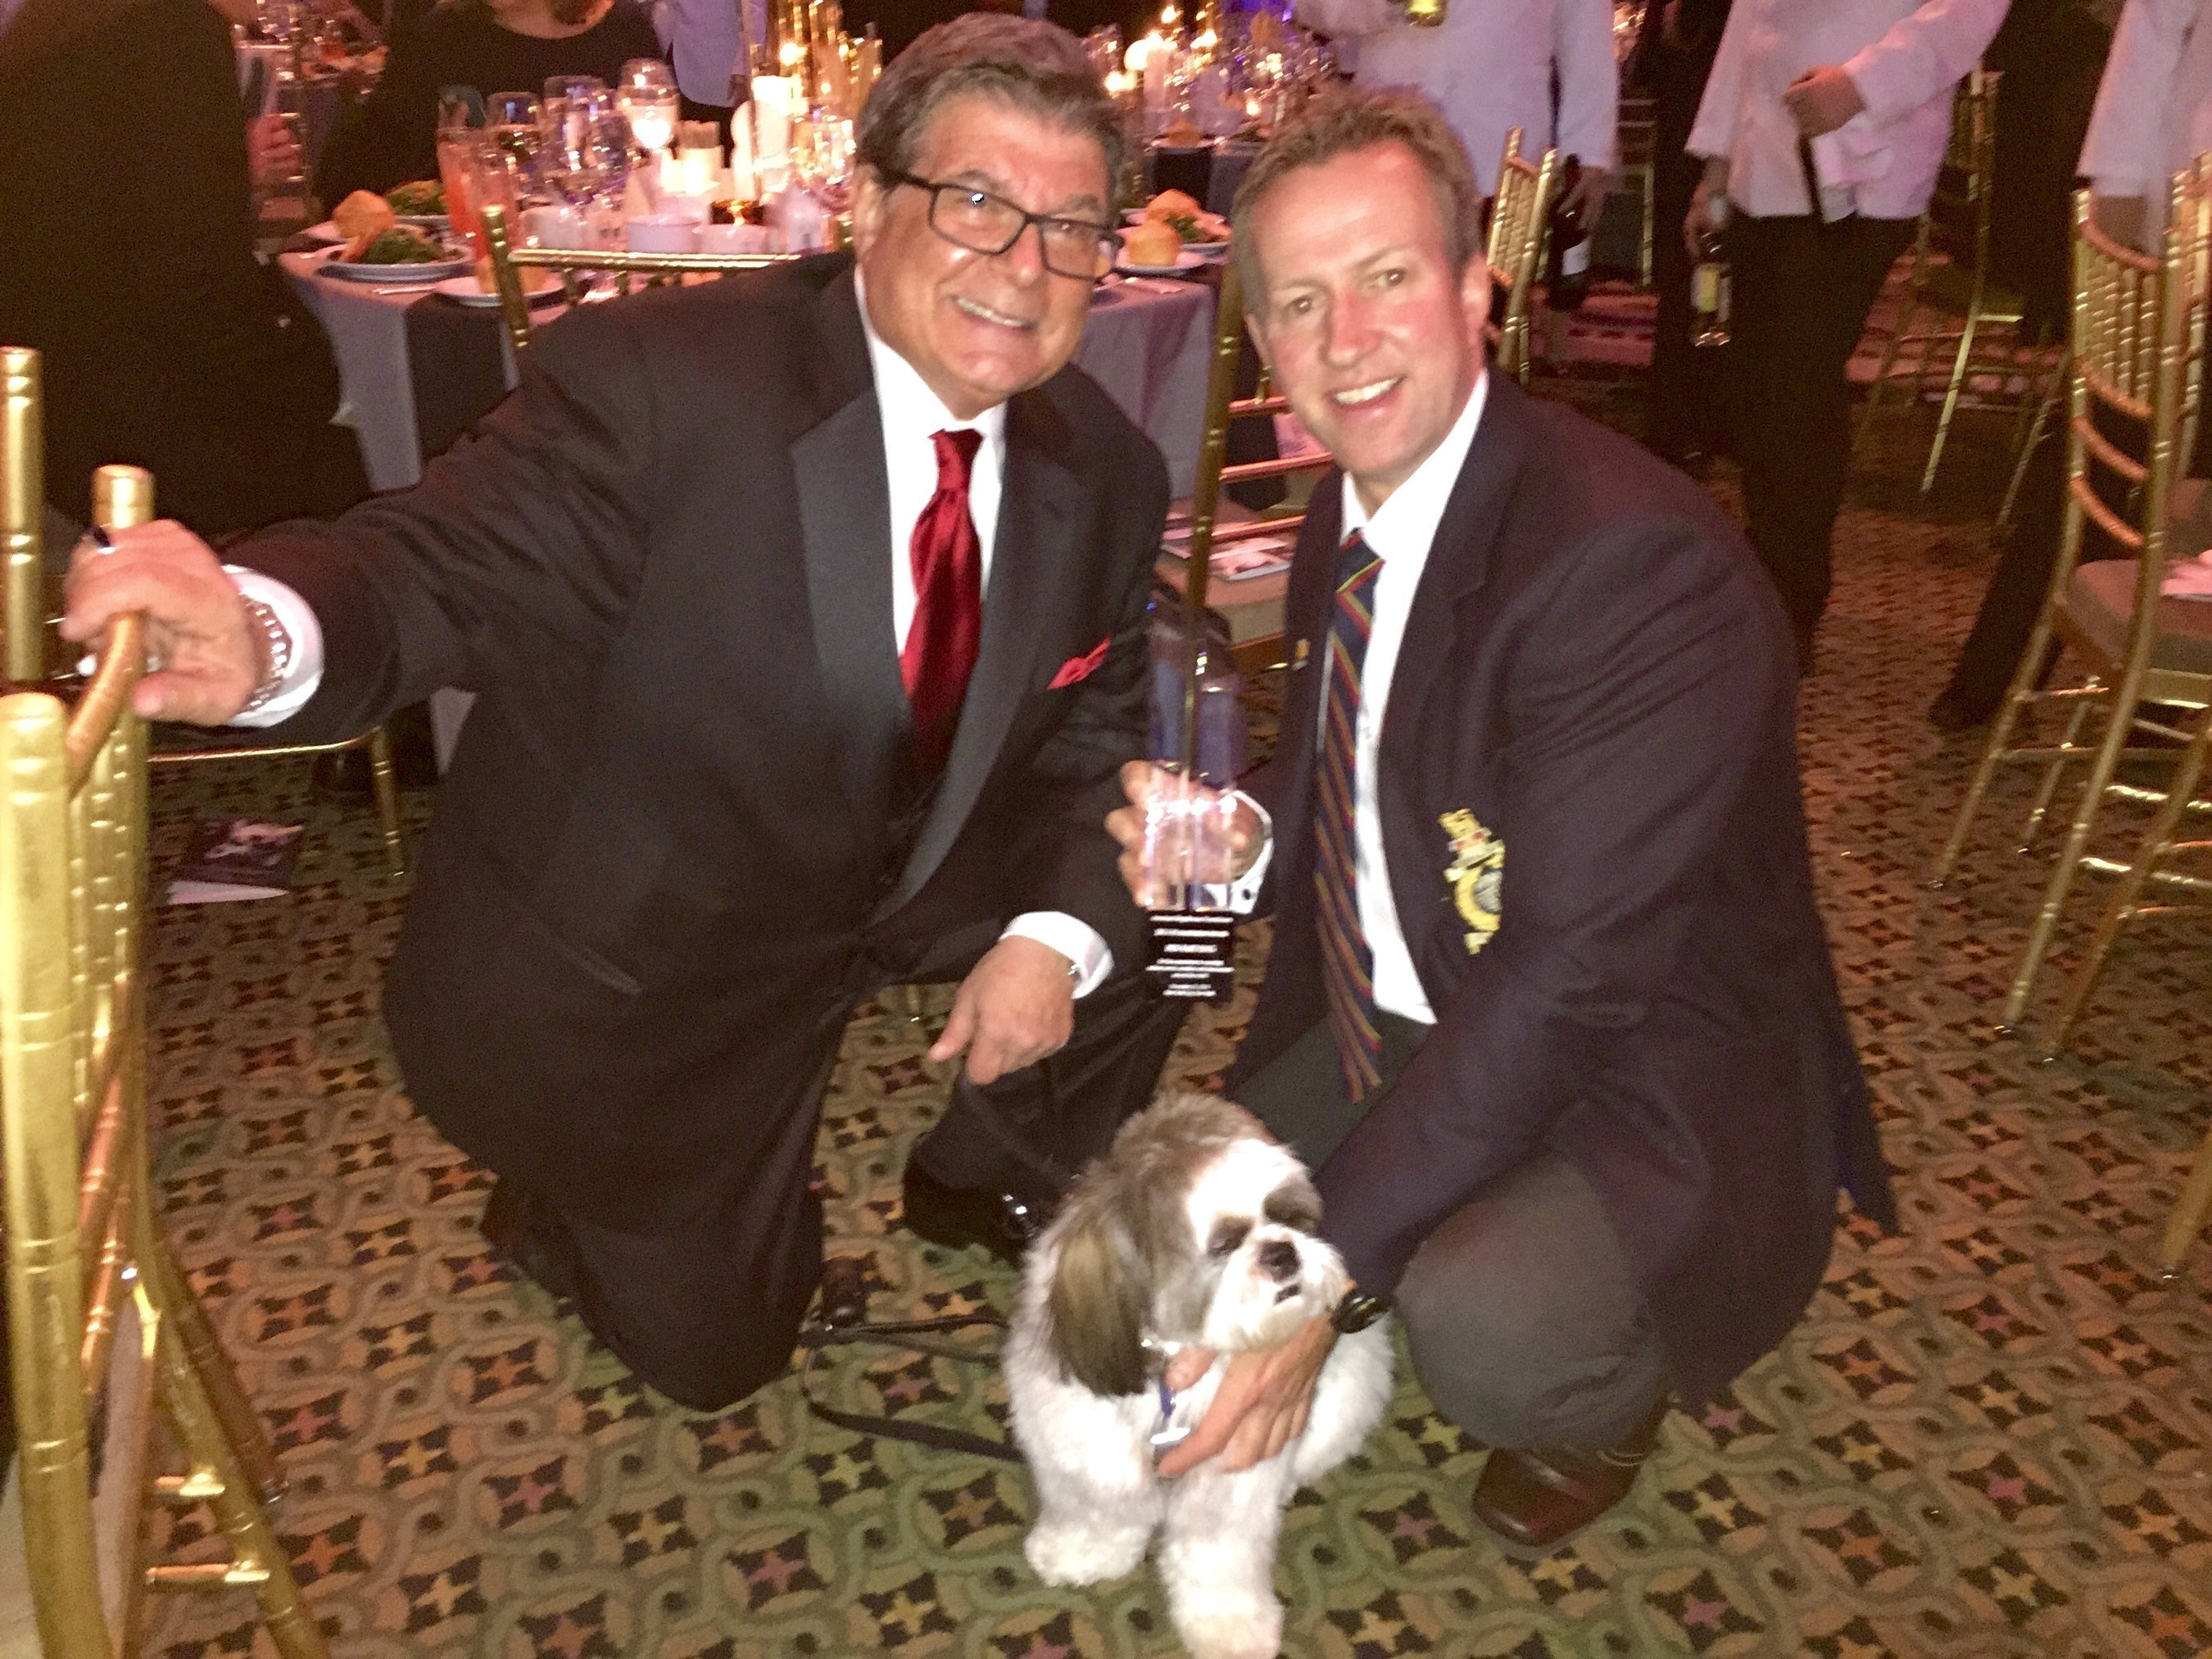 American Dog Rescue Founder Arthur E. Benjamin, Pen Farthing of Nowzad Dogs and Benjamin's sidekick Bandit pose for a photo at the Humane Society Of The United States' "To The Rescue! New York" benefit November 21. Farthing received American Dog Rescue's 2014 Humanitarian Award at the event. Proceeds from the event, held at Cipriani on 42nd Street in New York City, benefit HSUS' ongoing, national animal rescue efforts. Farthing also recently won the 2014 CNN "Hero of the Year Award."